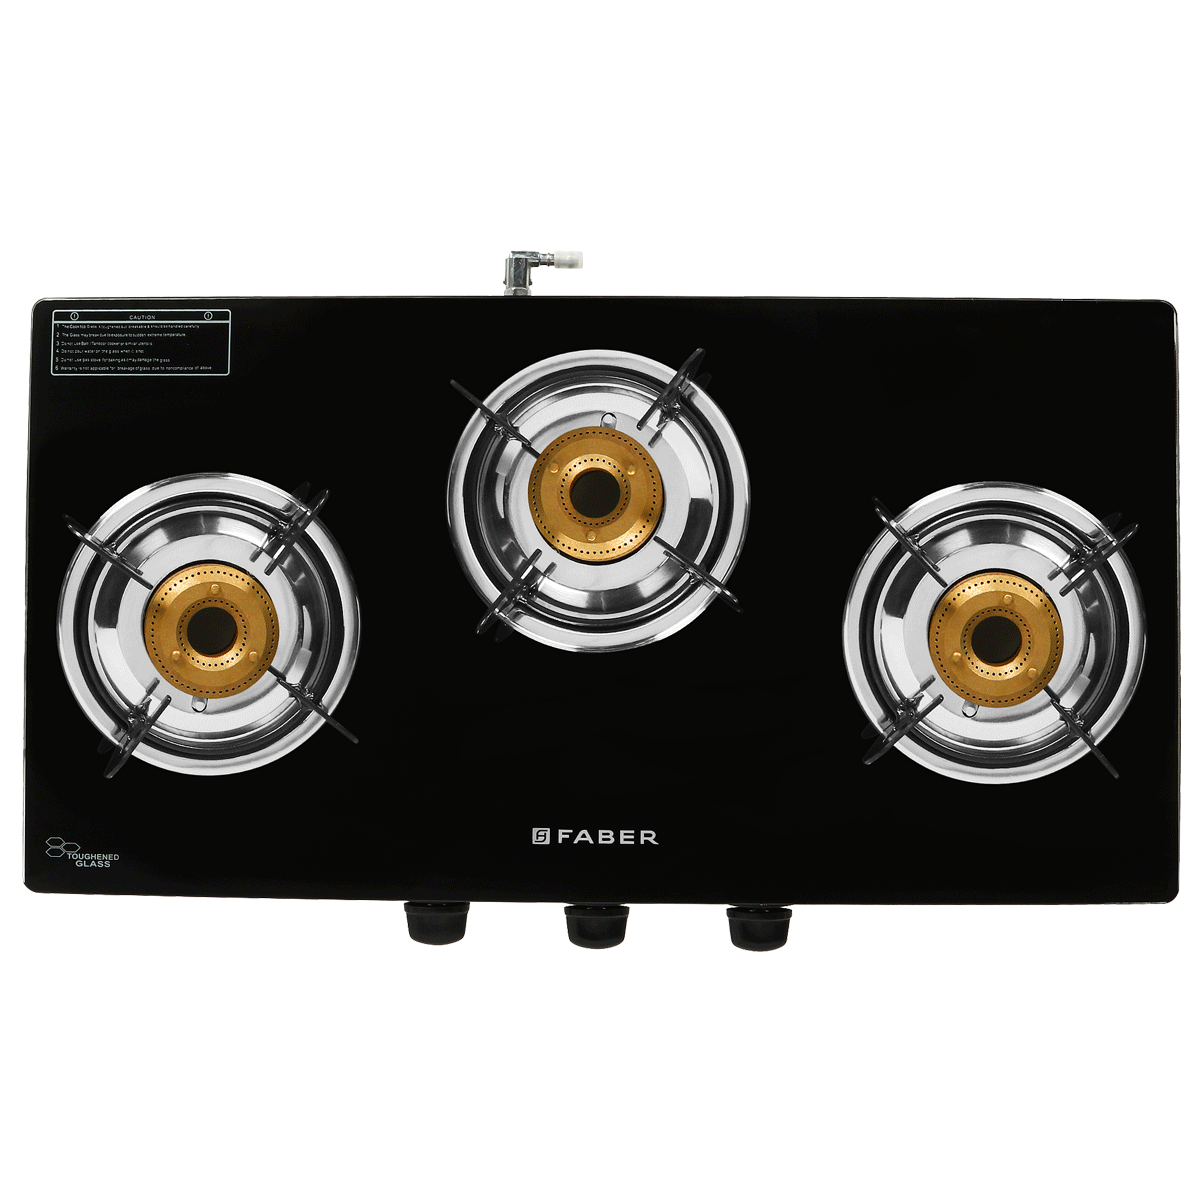 Faber Power 3BB 3 Burner Toughened Glass Gas Stove (Powder Coating Round Pan Support, 106.0629.732, Black)